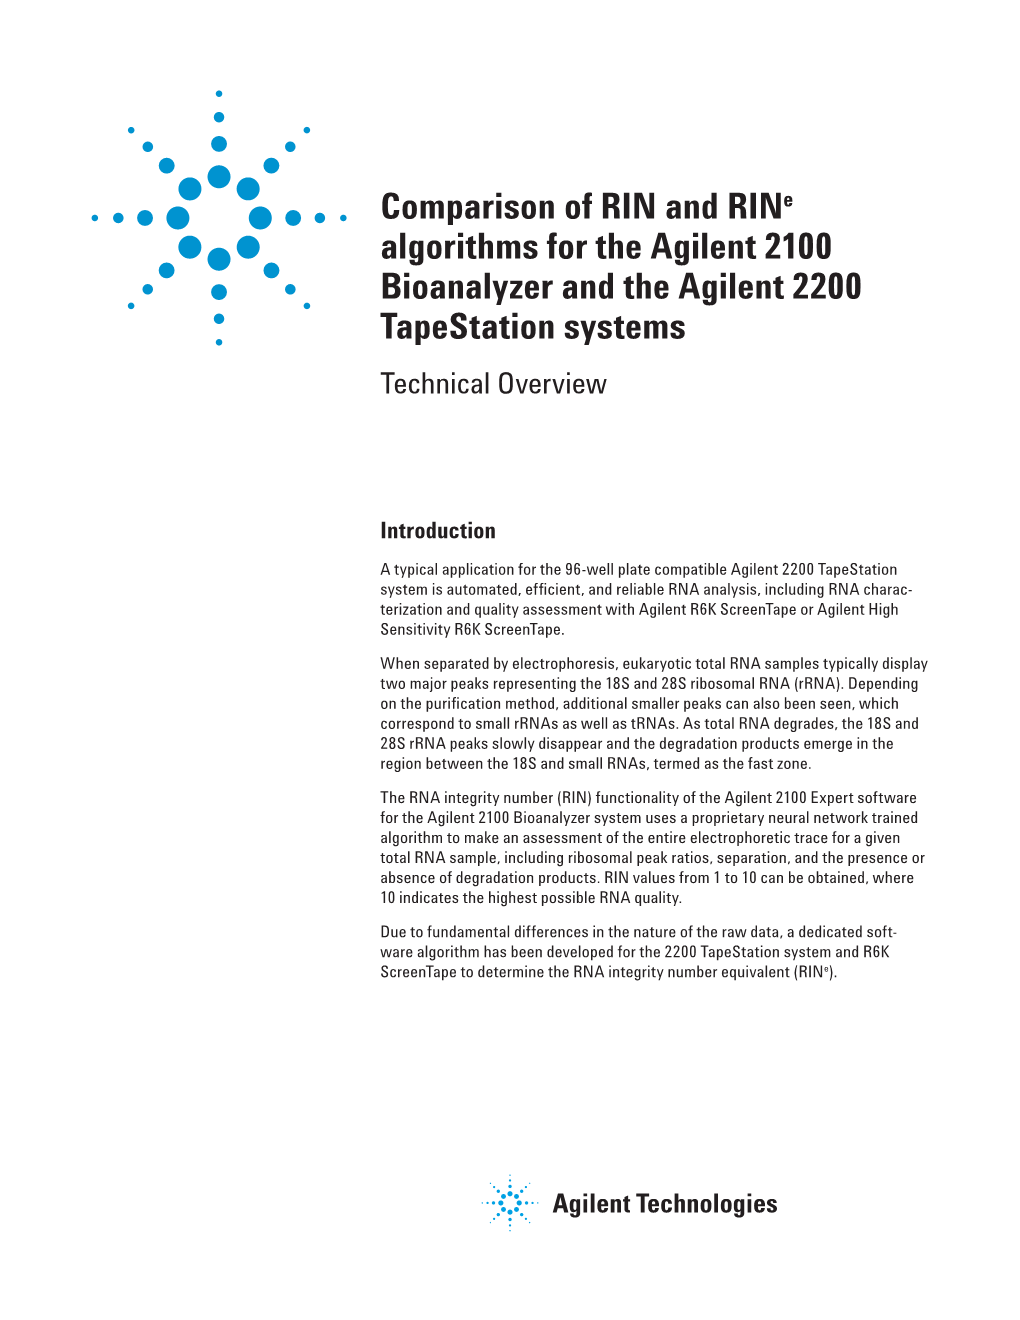 Comparison of RIN and Rine Algorithms for the Agilent 2100 Bioanalyzer and the Agilent 2200 Tapestation Systems Technical Overview